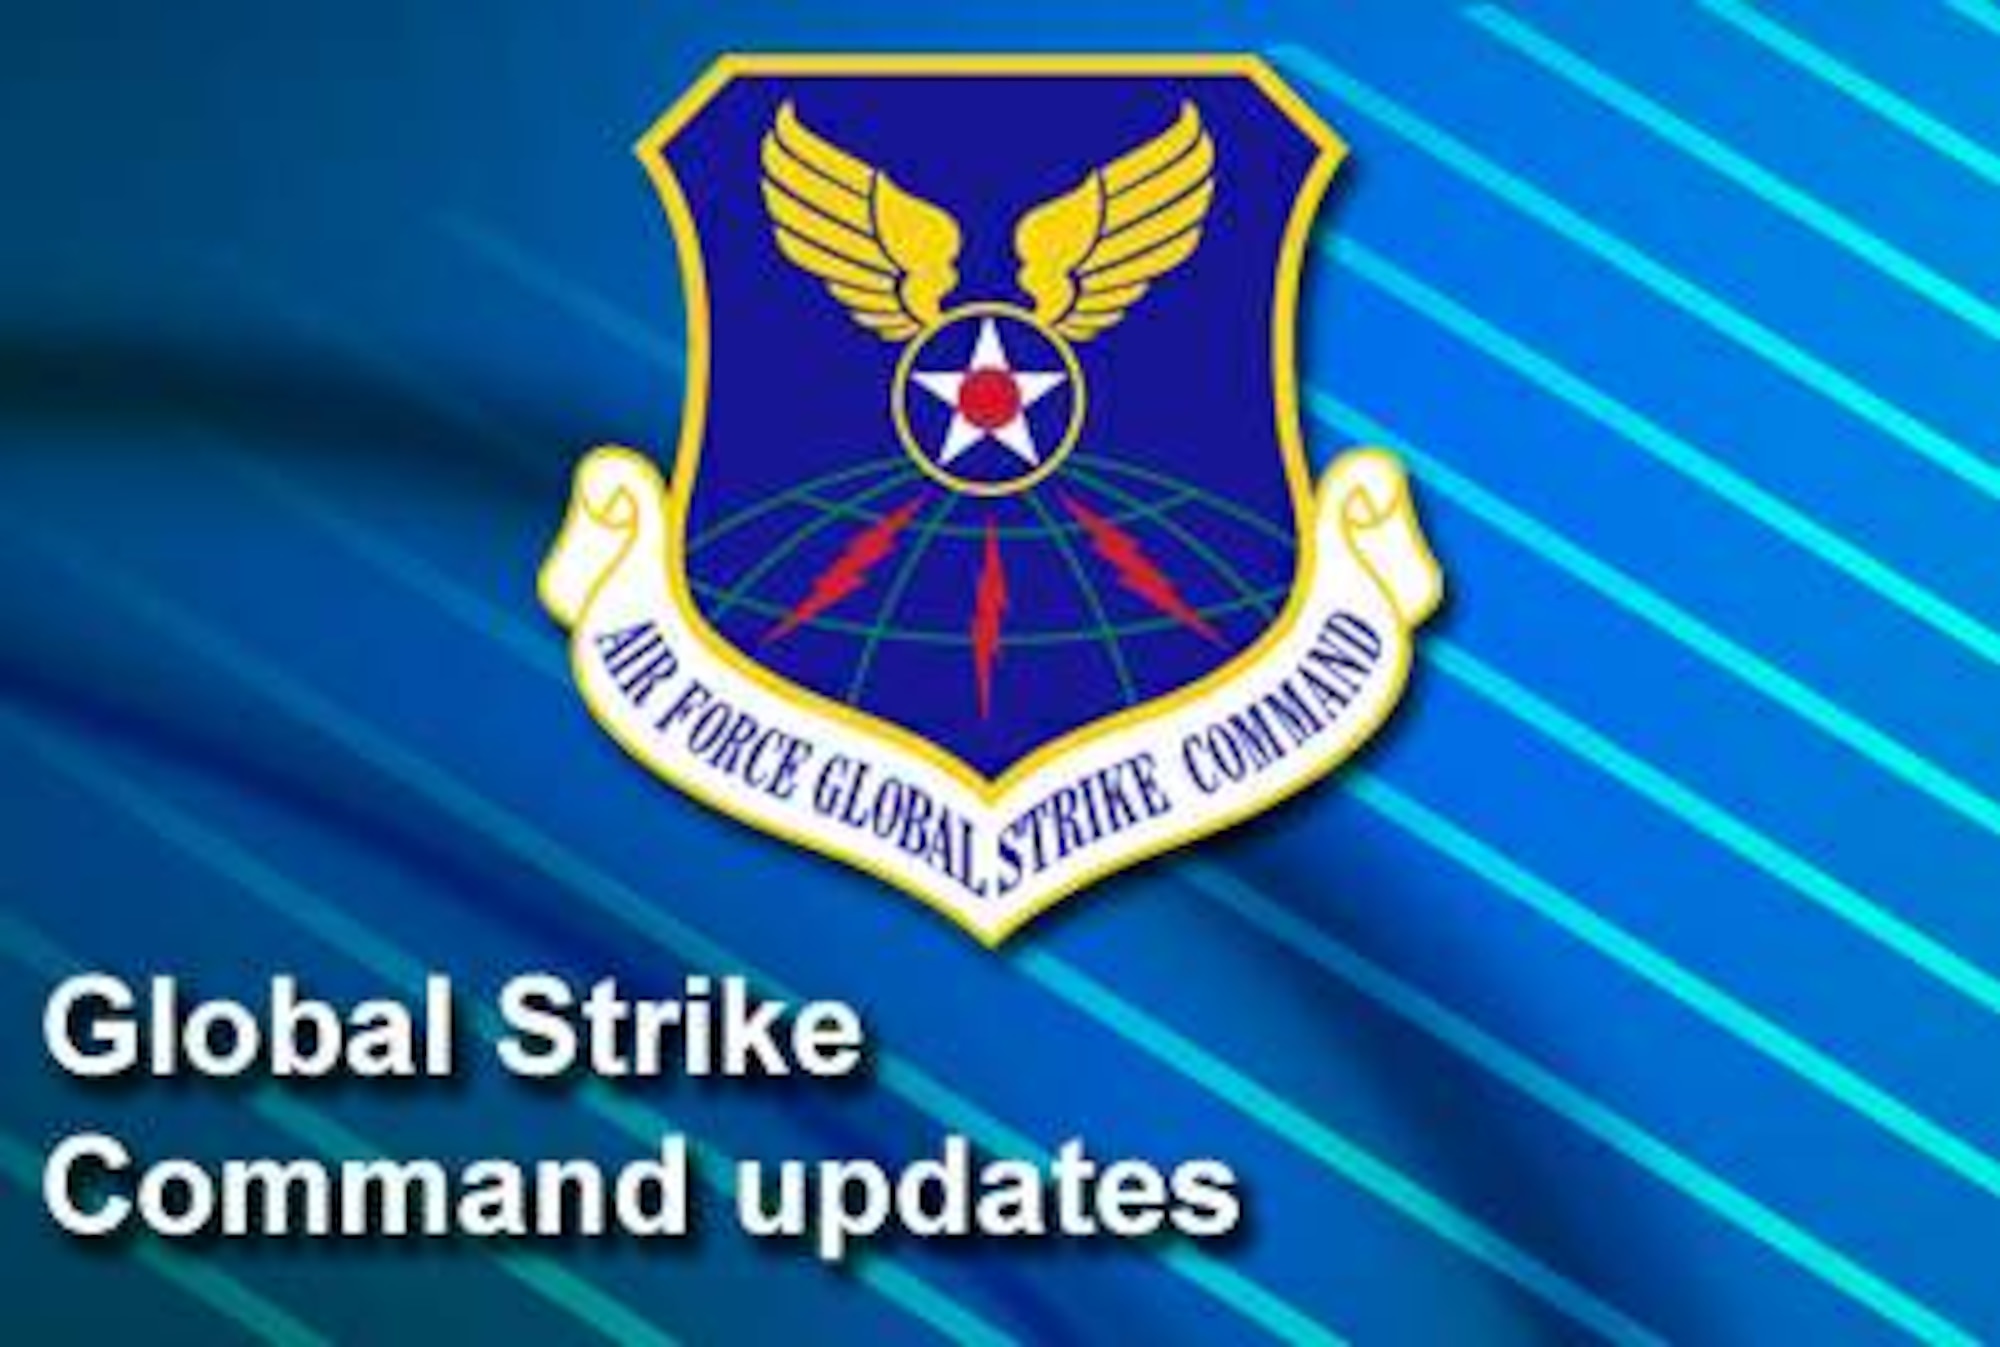 Air Force Global Strike Command's top officer provided an update on the command's progress toward full operational capability during a speech at the Capitol Hill Club Oct. 2, 2009, in Washington, D.C. (U.S. Air Force graphic) 